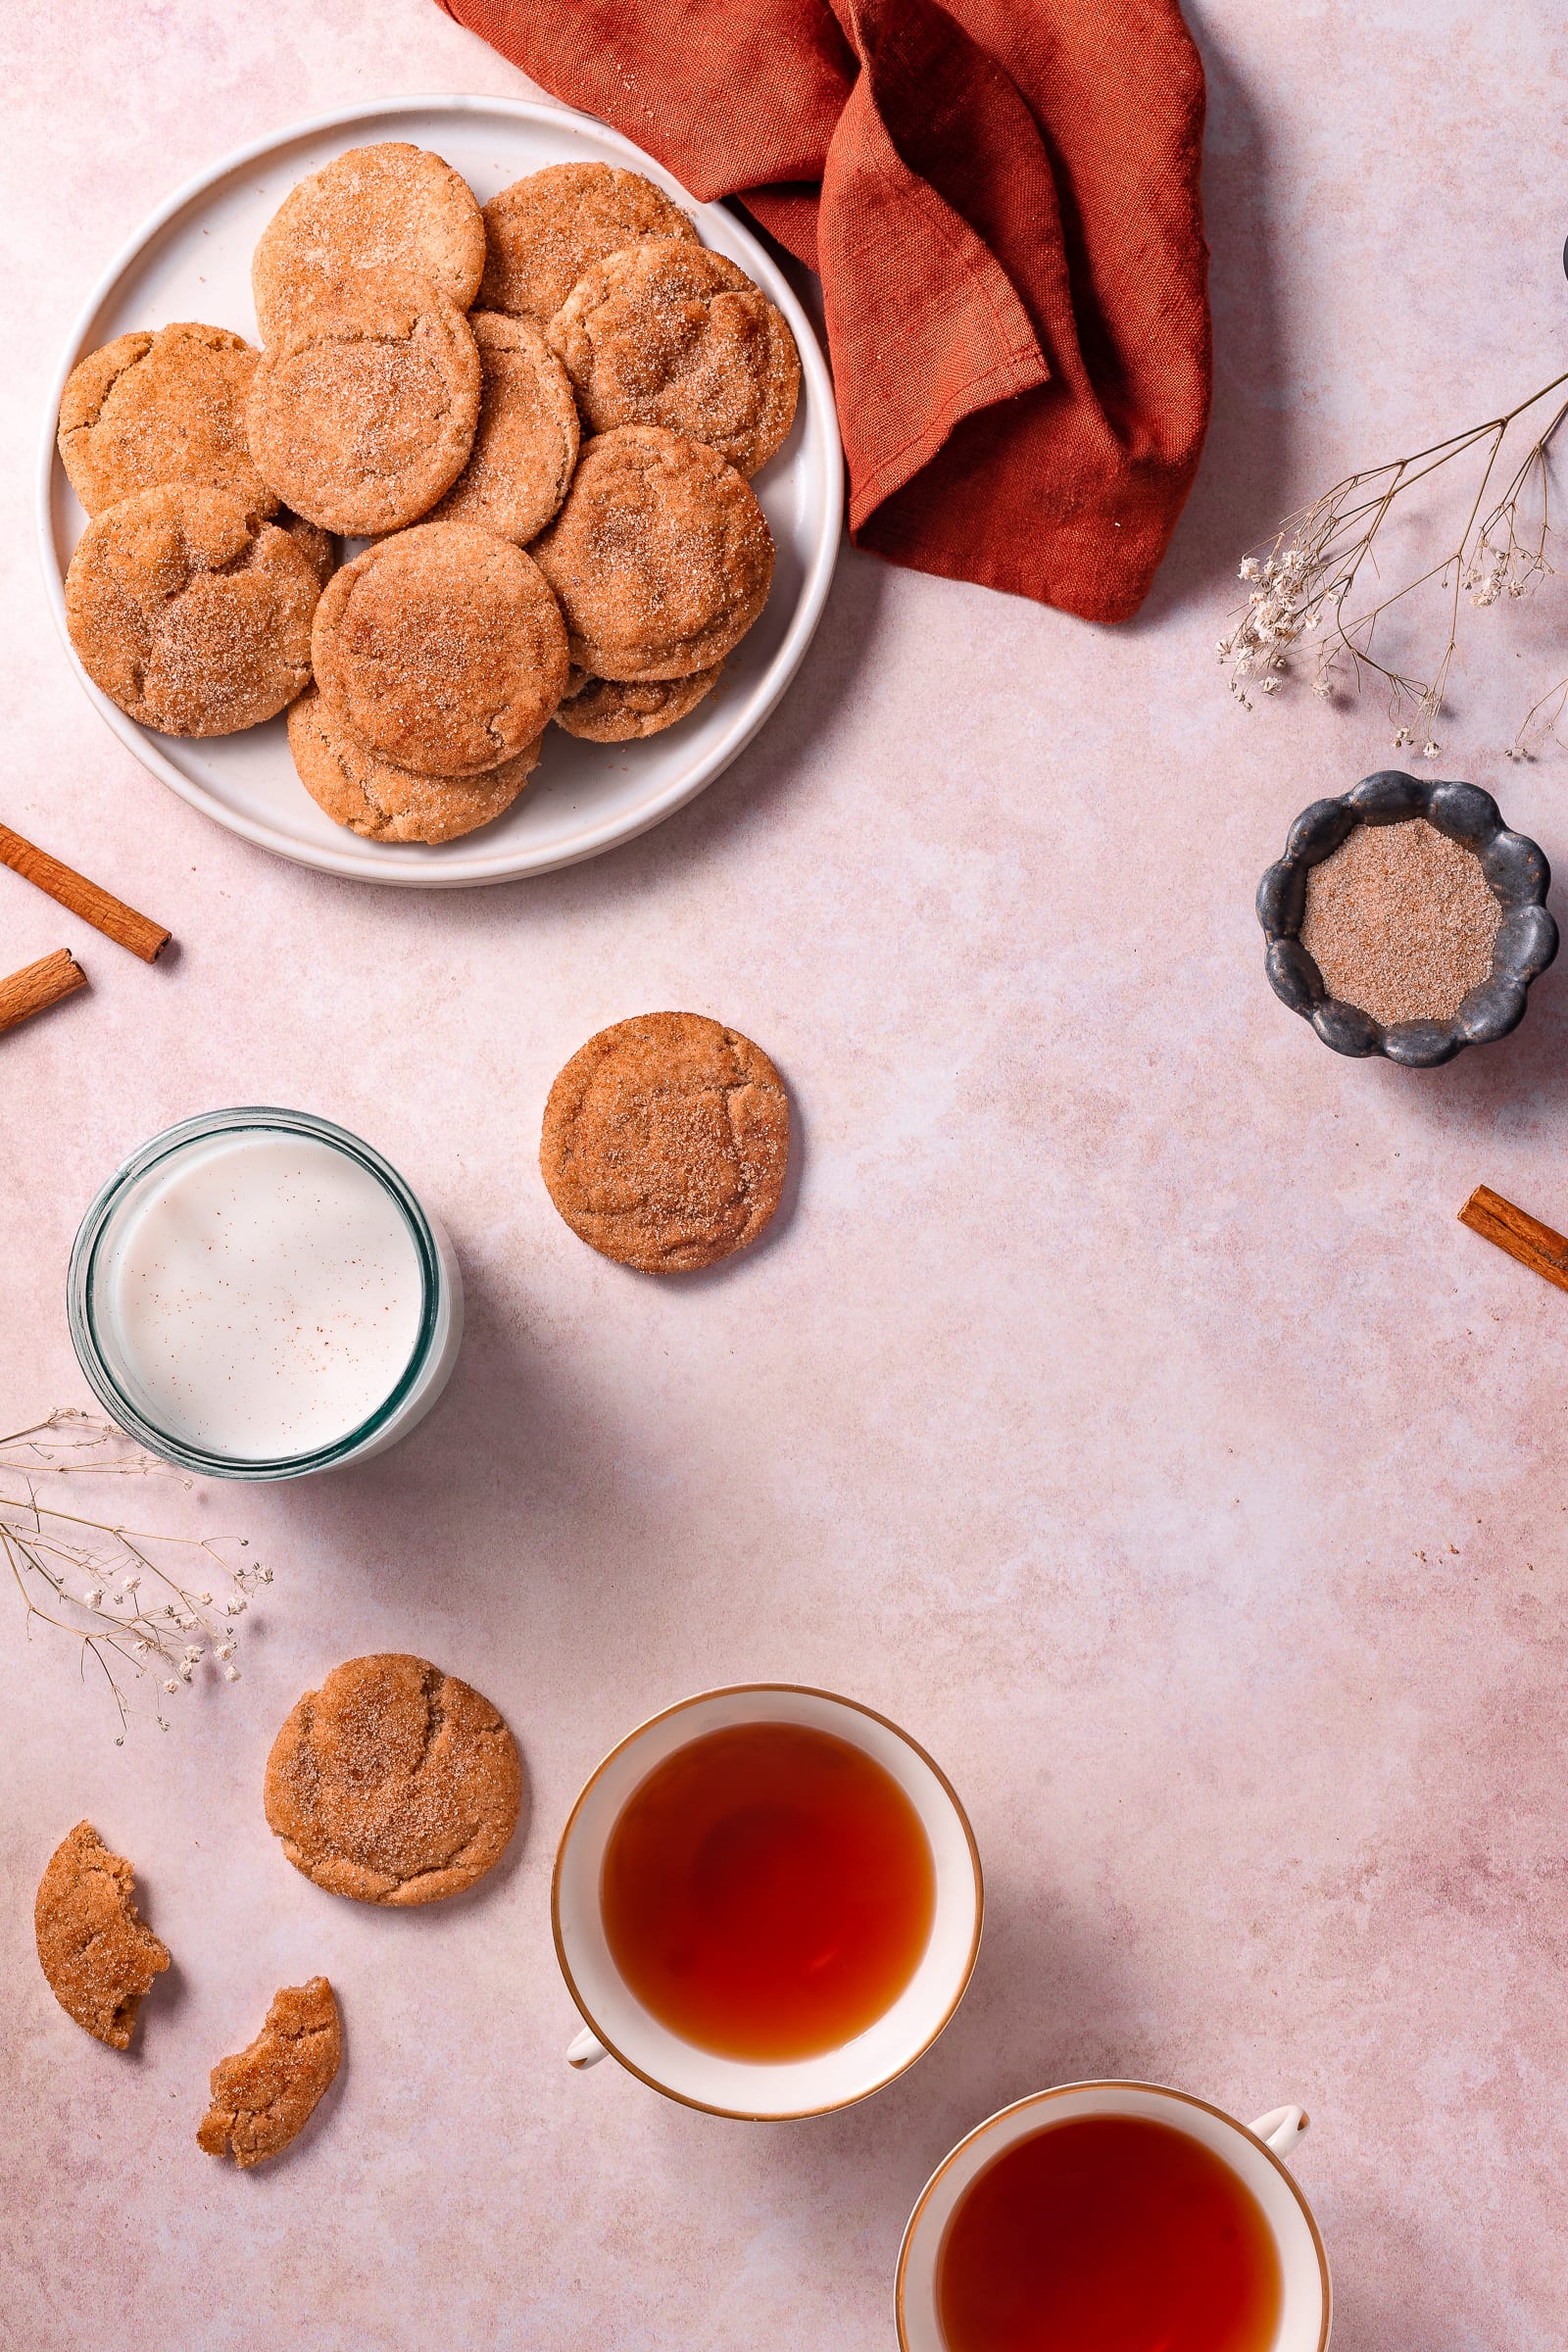 Snickerdoodle cookies on a plate surrounded by cinnamon sticks, glass of milk, and cup of tea.